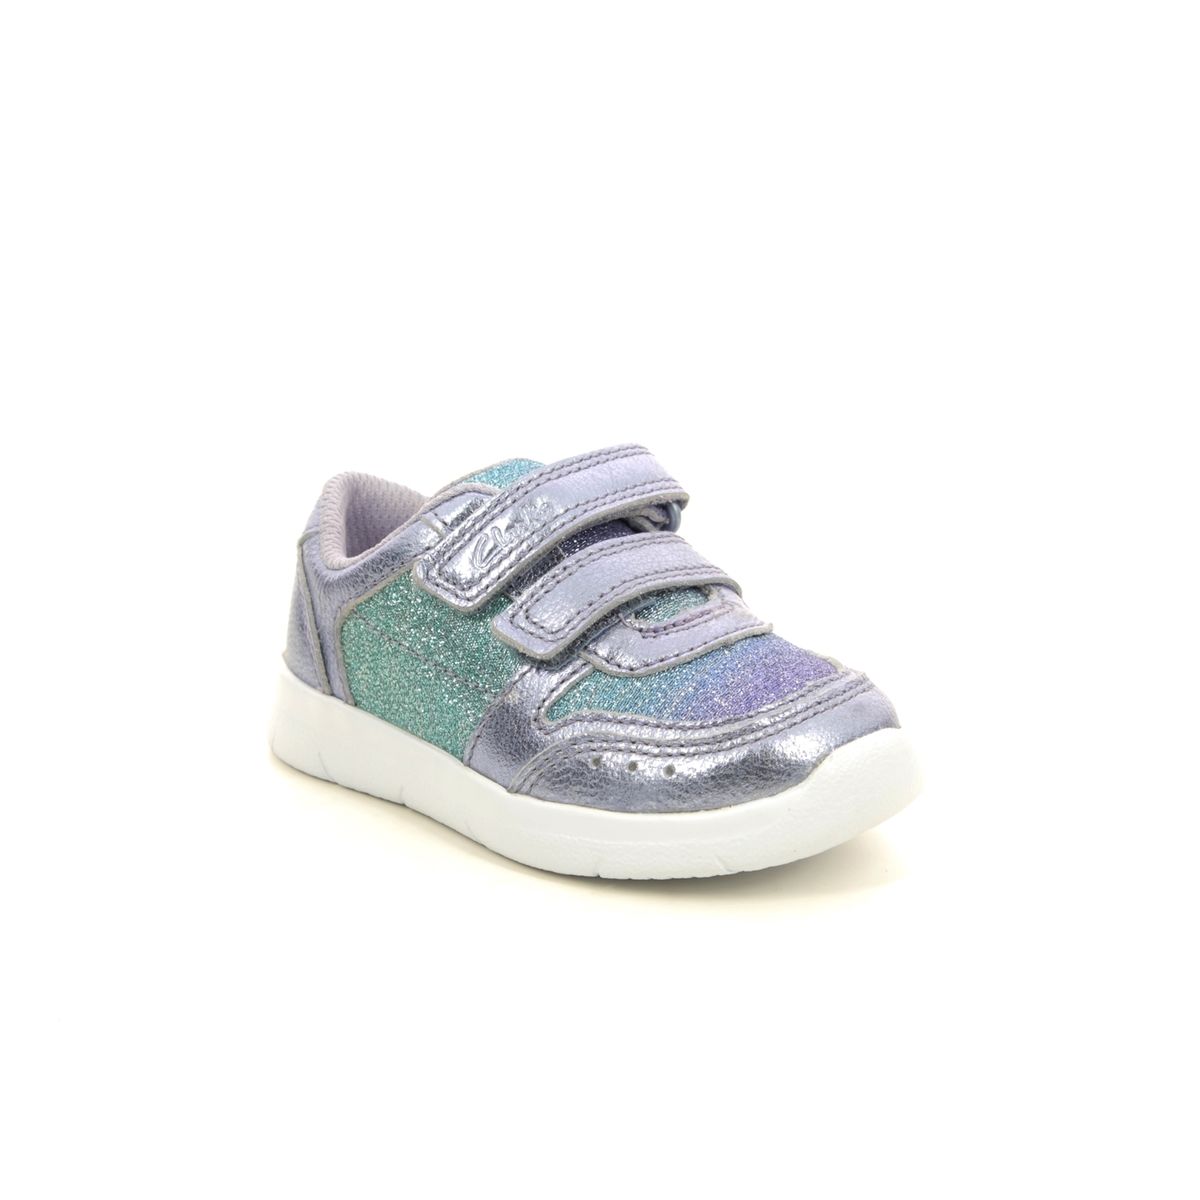 Clarks Ath Sonar T Lilac Kids Toddler Girls Trainers 541217G In Size 4.5 In Plain Lilac G Width Fitting